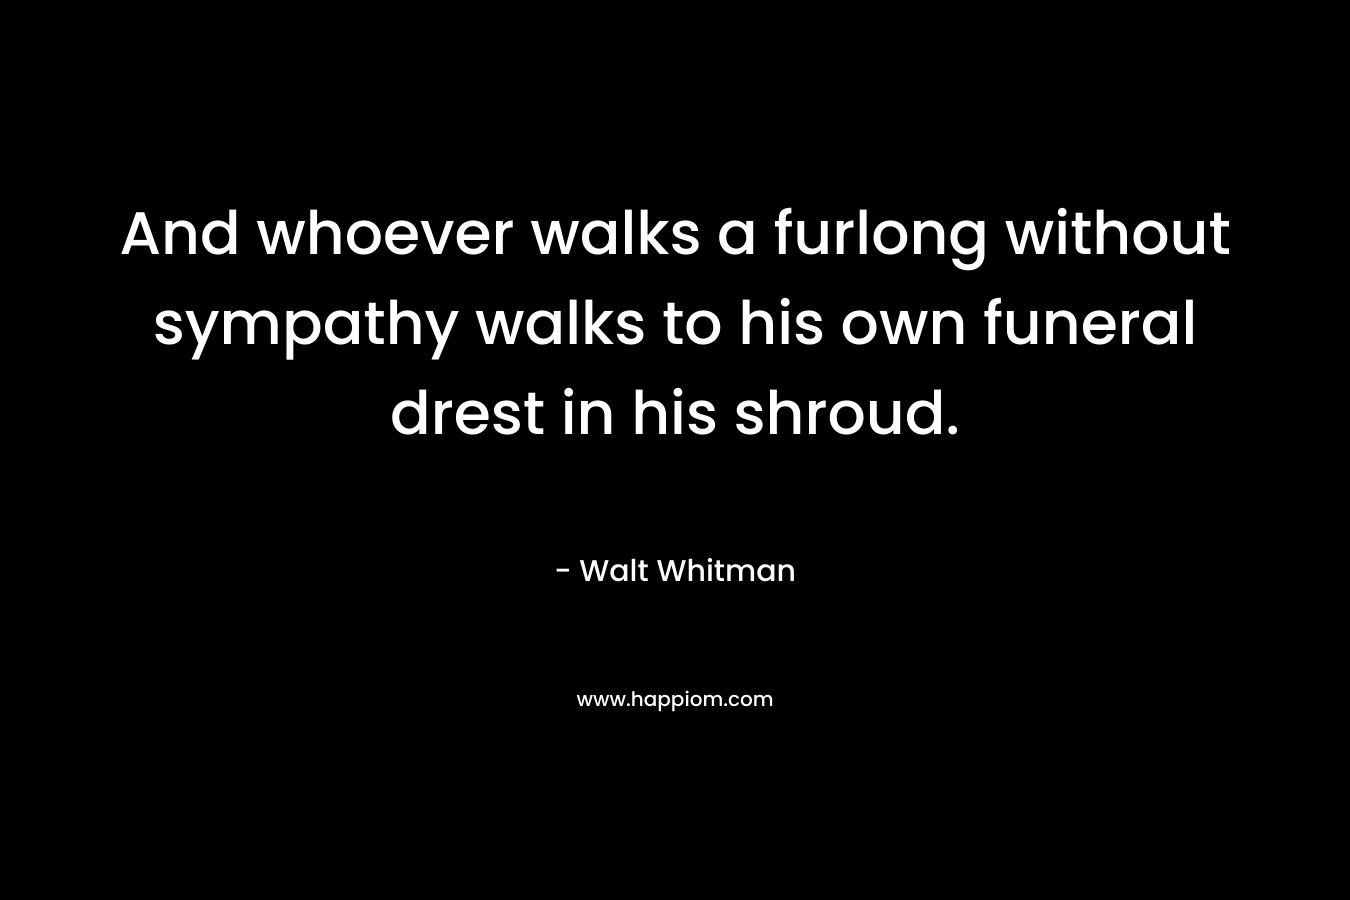 And whoever walks a furlong without sympathy walks to his own funeral drest in his shroud. – Walt Whitman